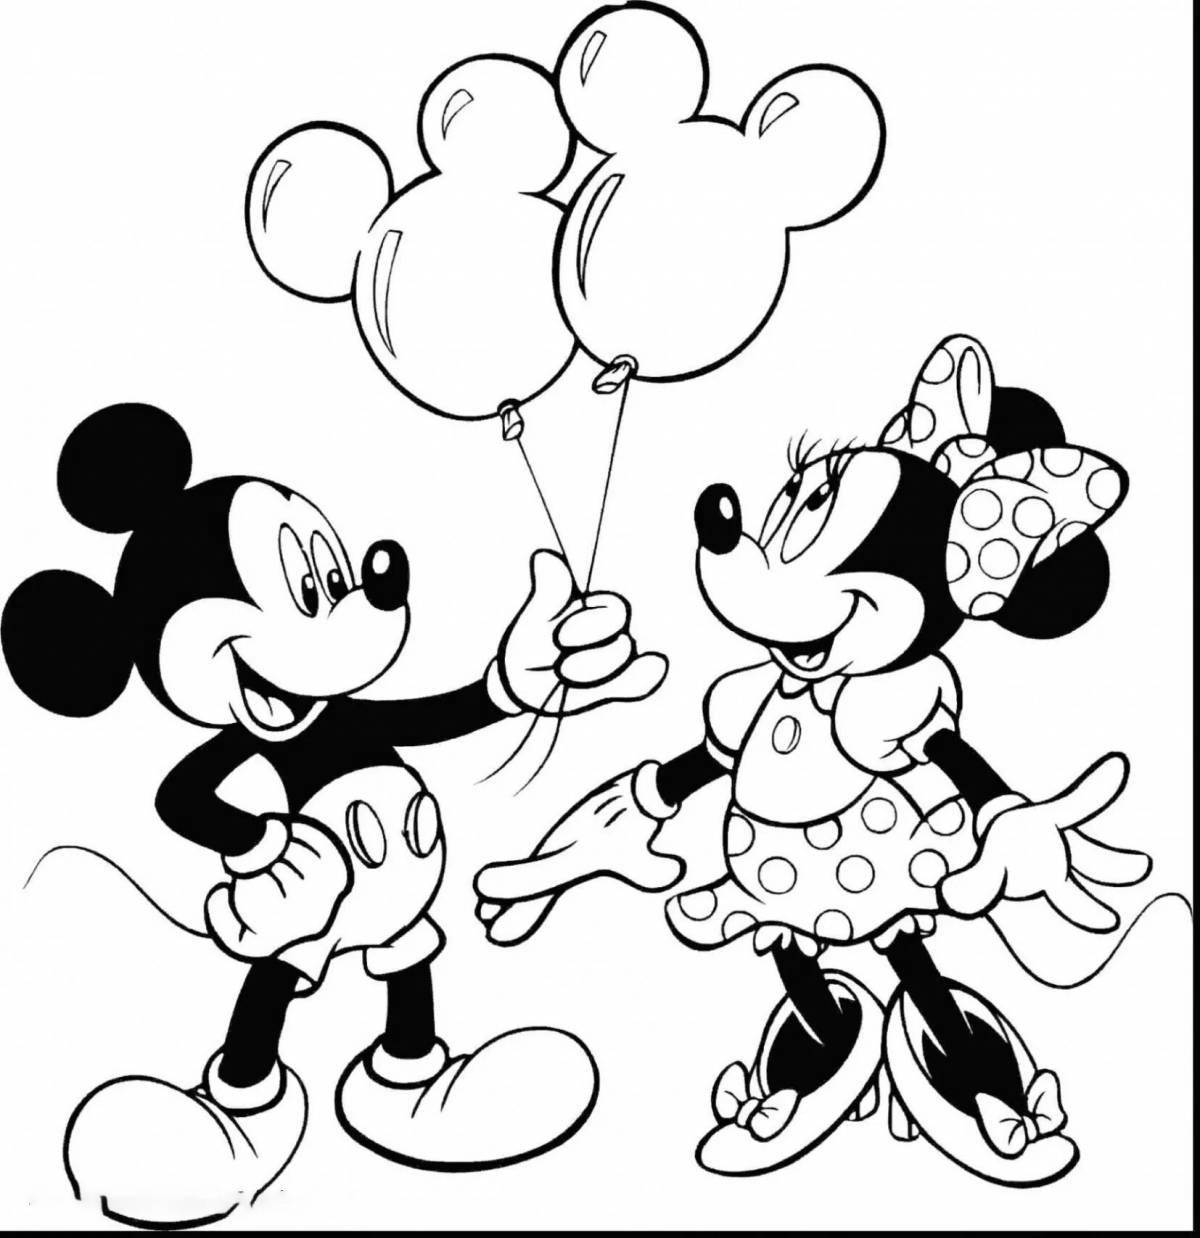 Mickey mouse for kids #8